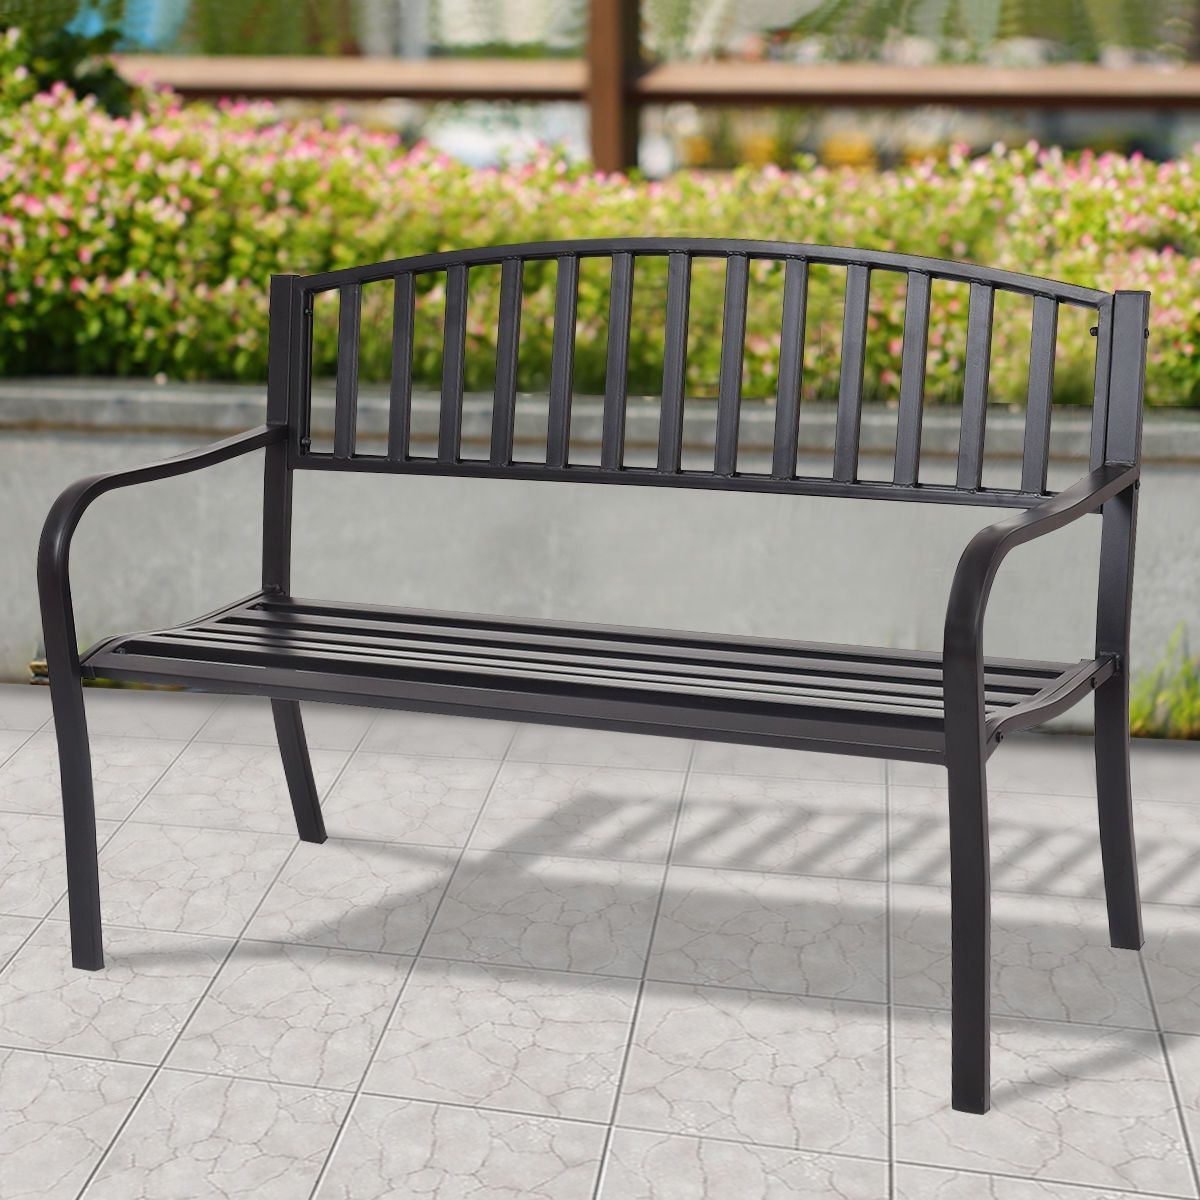 Best And Newest Overstock: Online Shopping – Bedding, Furniture Within Alvah Slatted Cast Iron And Tubular Steel Garden Benches (View 9 of 30)